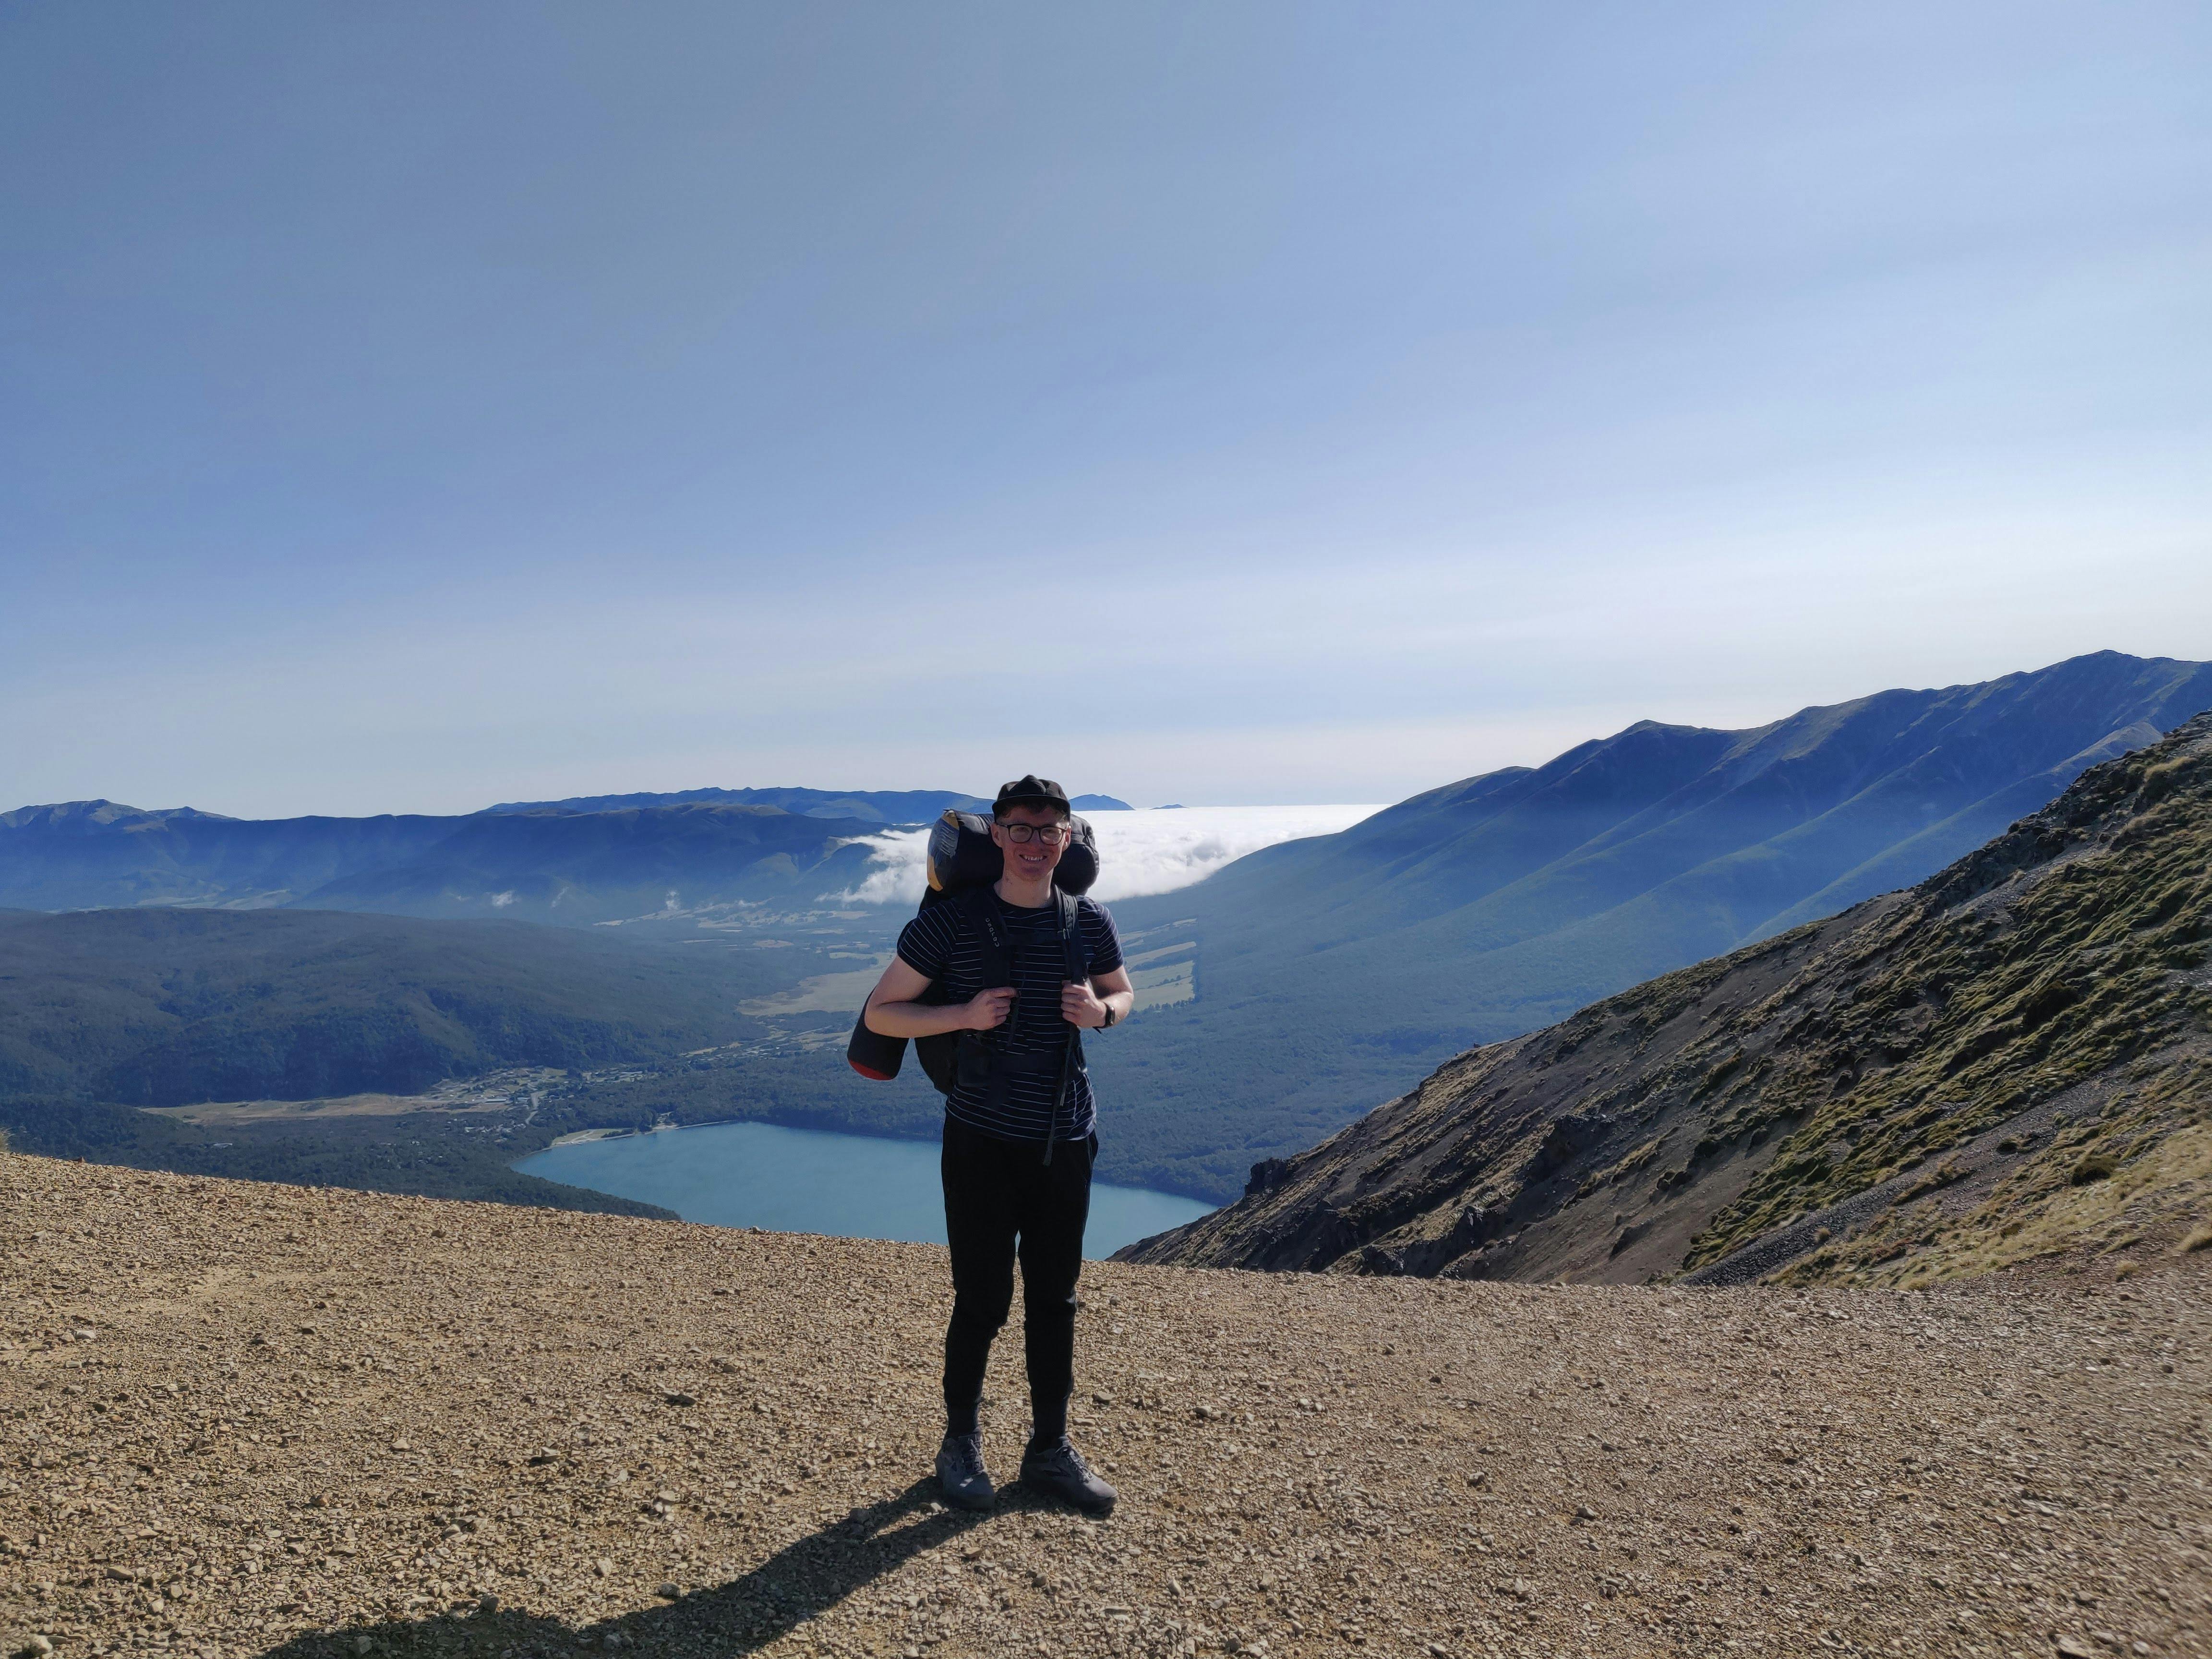 Me on top of a mountain with a landscape view of Nelson lakes behind